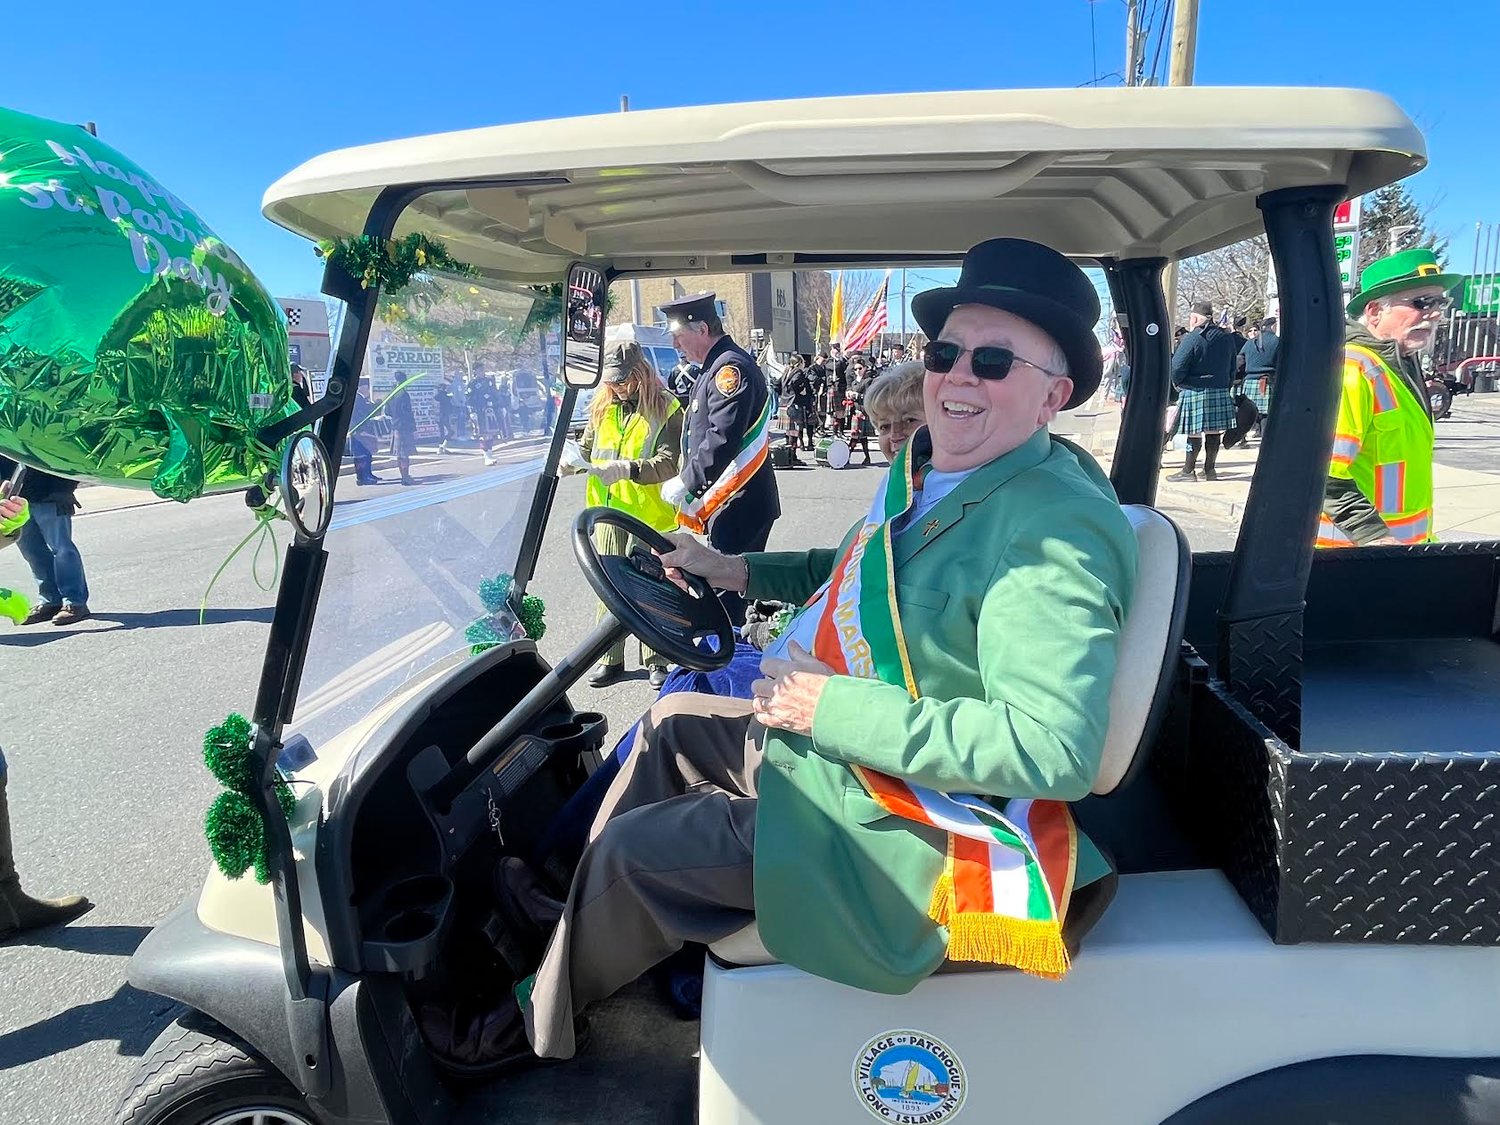 The Greater Patchogue Foundation’s Cultural Heritage Committee and Village of Patchogue’s St. Patrick’s Day parade kicked off on March 19 under 2023 grand marshal Deacon Marty McIndoe from St. Francis De Sales R.C. Church. “May Peace Be With You,” read the banner congratulating McIndoe on his honor. The parade began at noon with the two-mile May the Road Rise to Meet Ye Race, and marchers stepped off from the East Main Street intersection of Route 112 and finished at the viewing stand on the corner of Havens Avenue and West Main Street. Pictured is Deacon Marty McIndoe and his wife, Martha,  as they lead the parade.